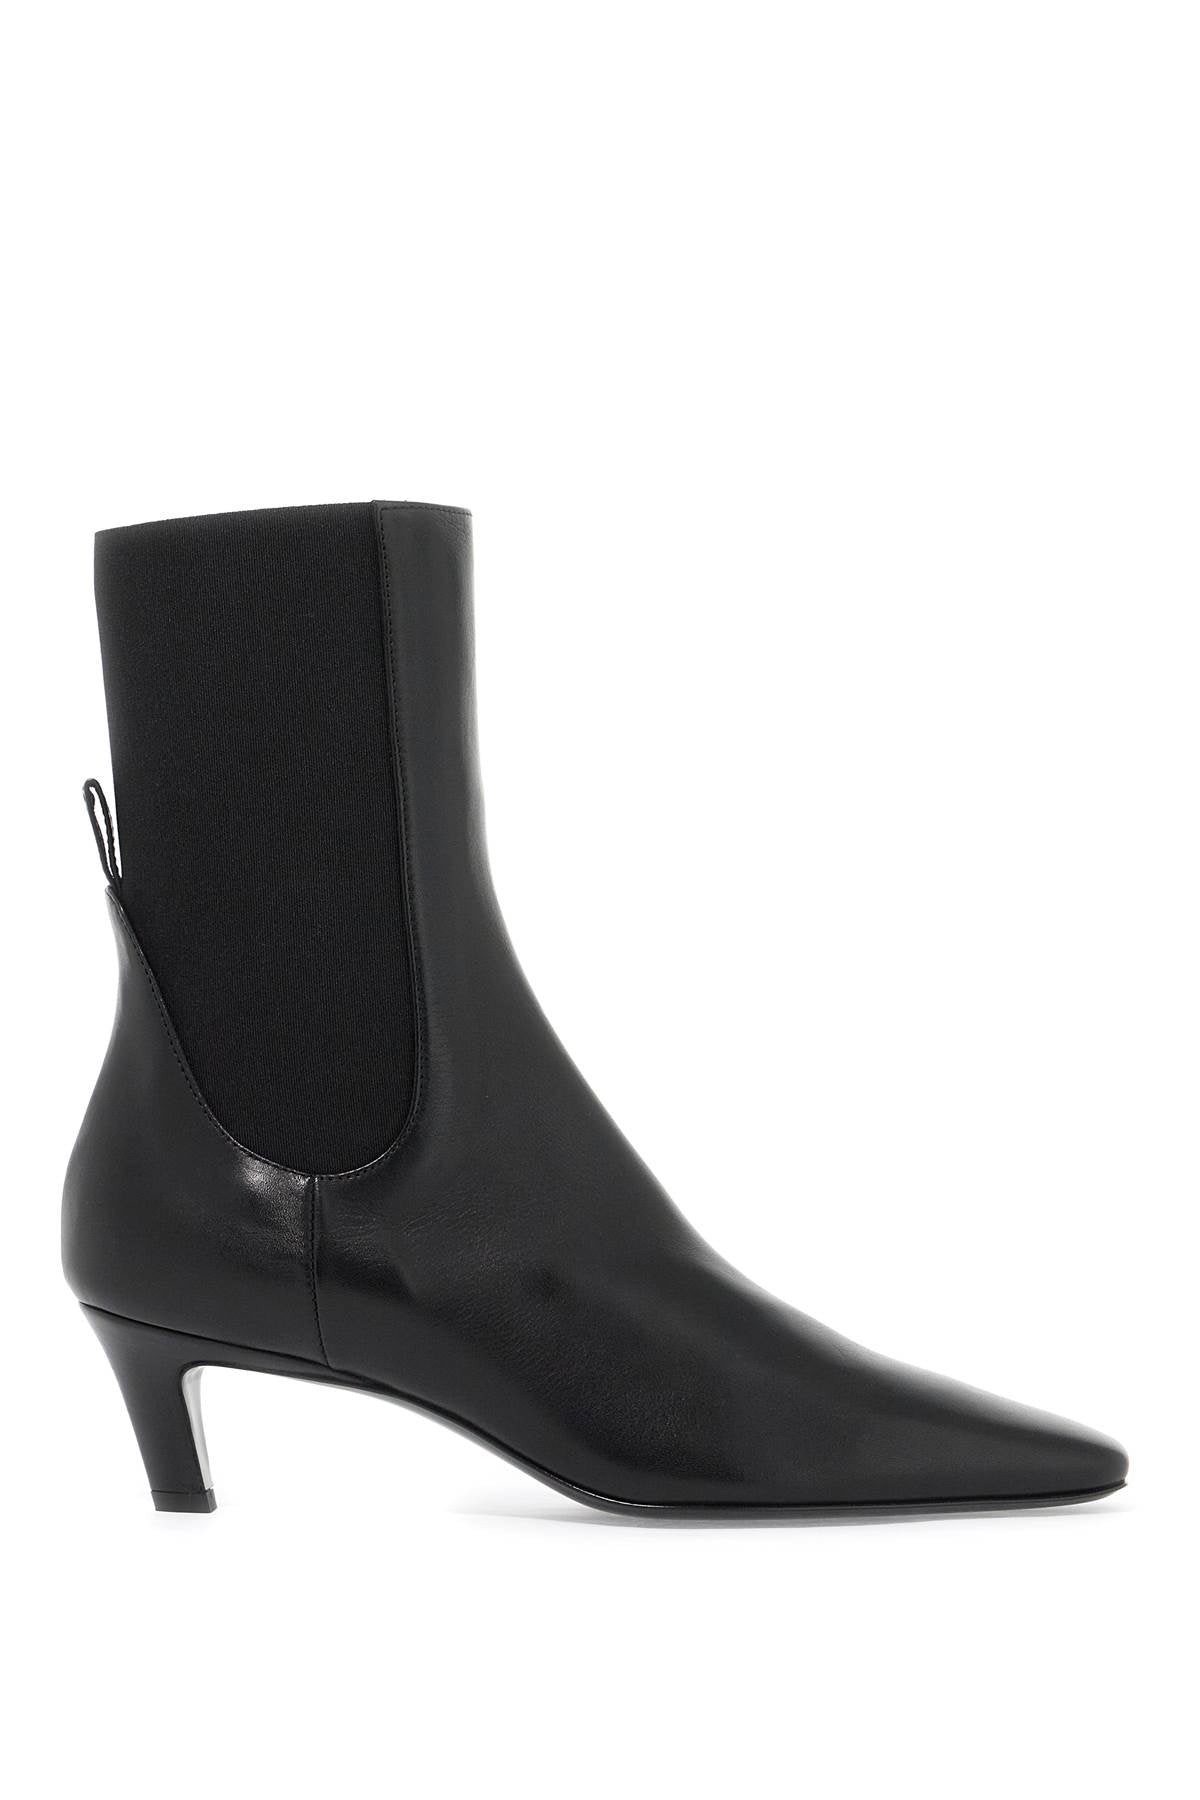 Toteme Mid Heel 50MM Leather Boots Black